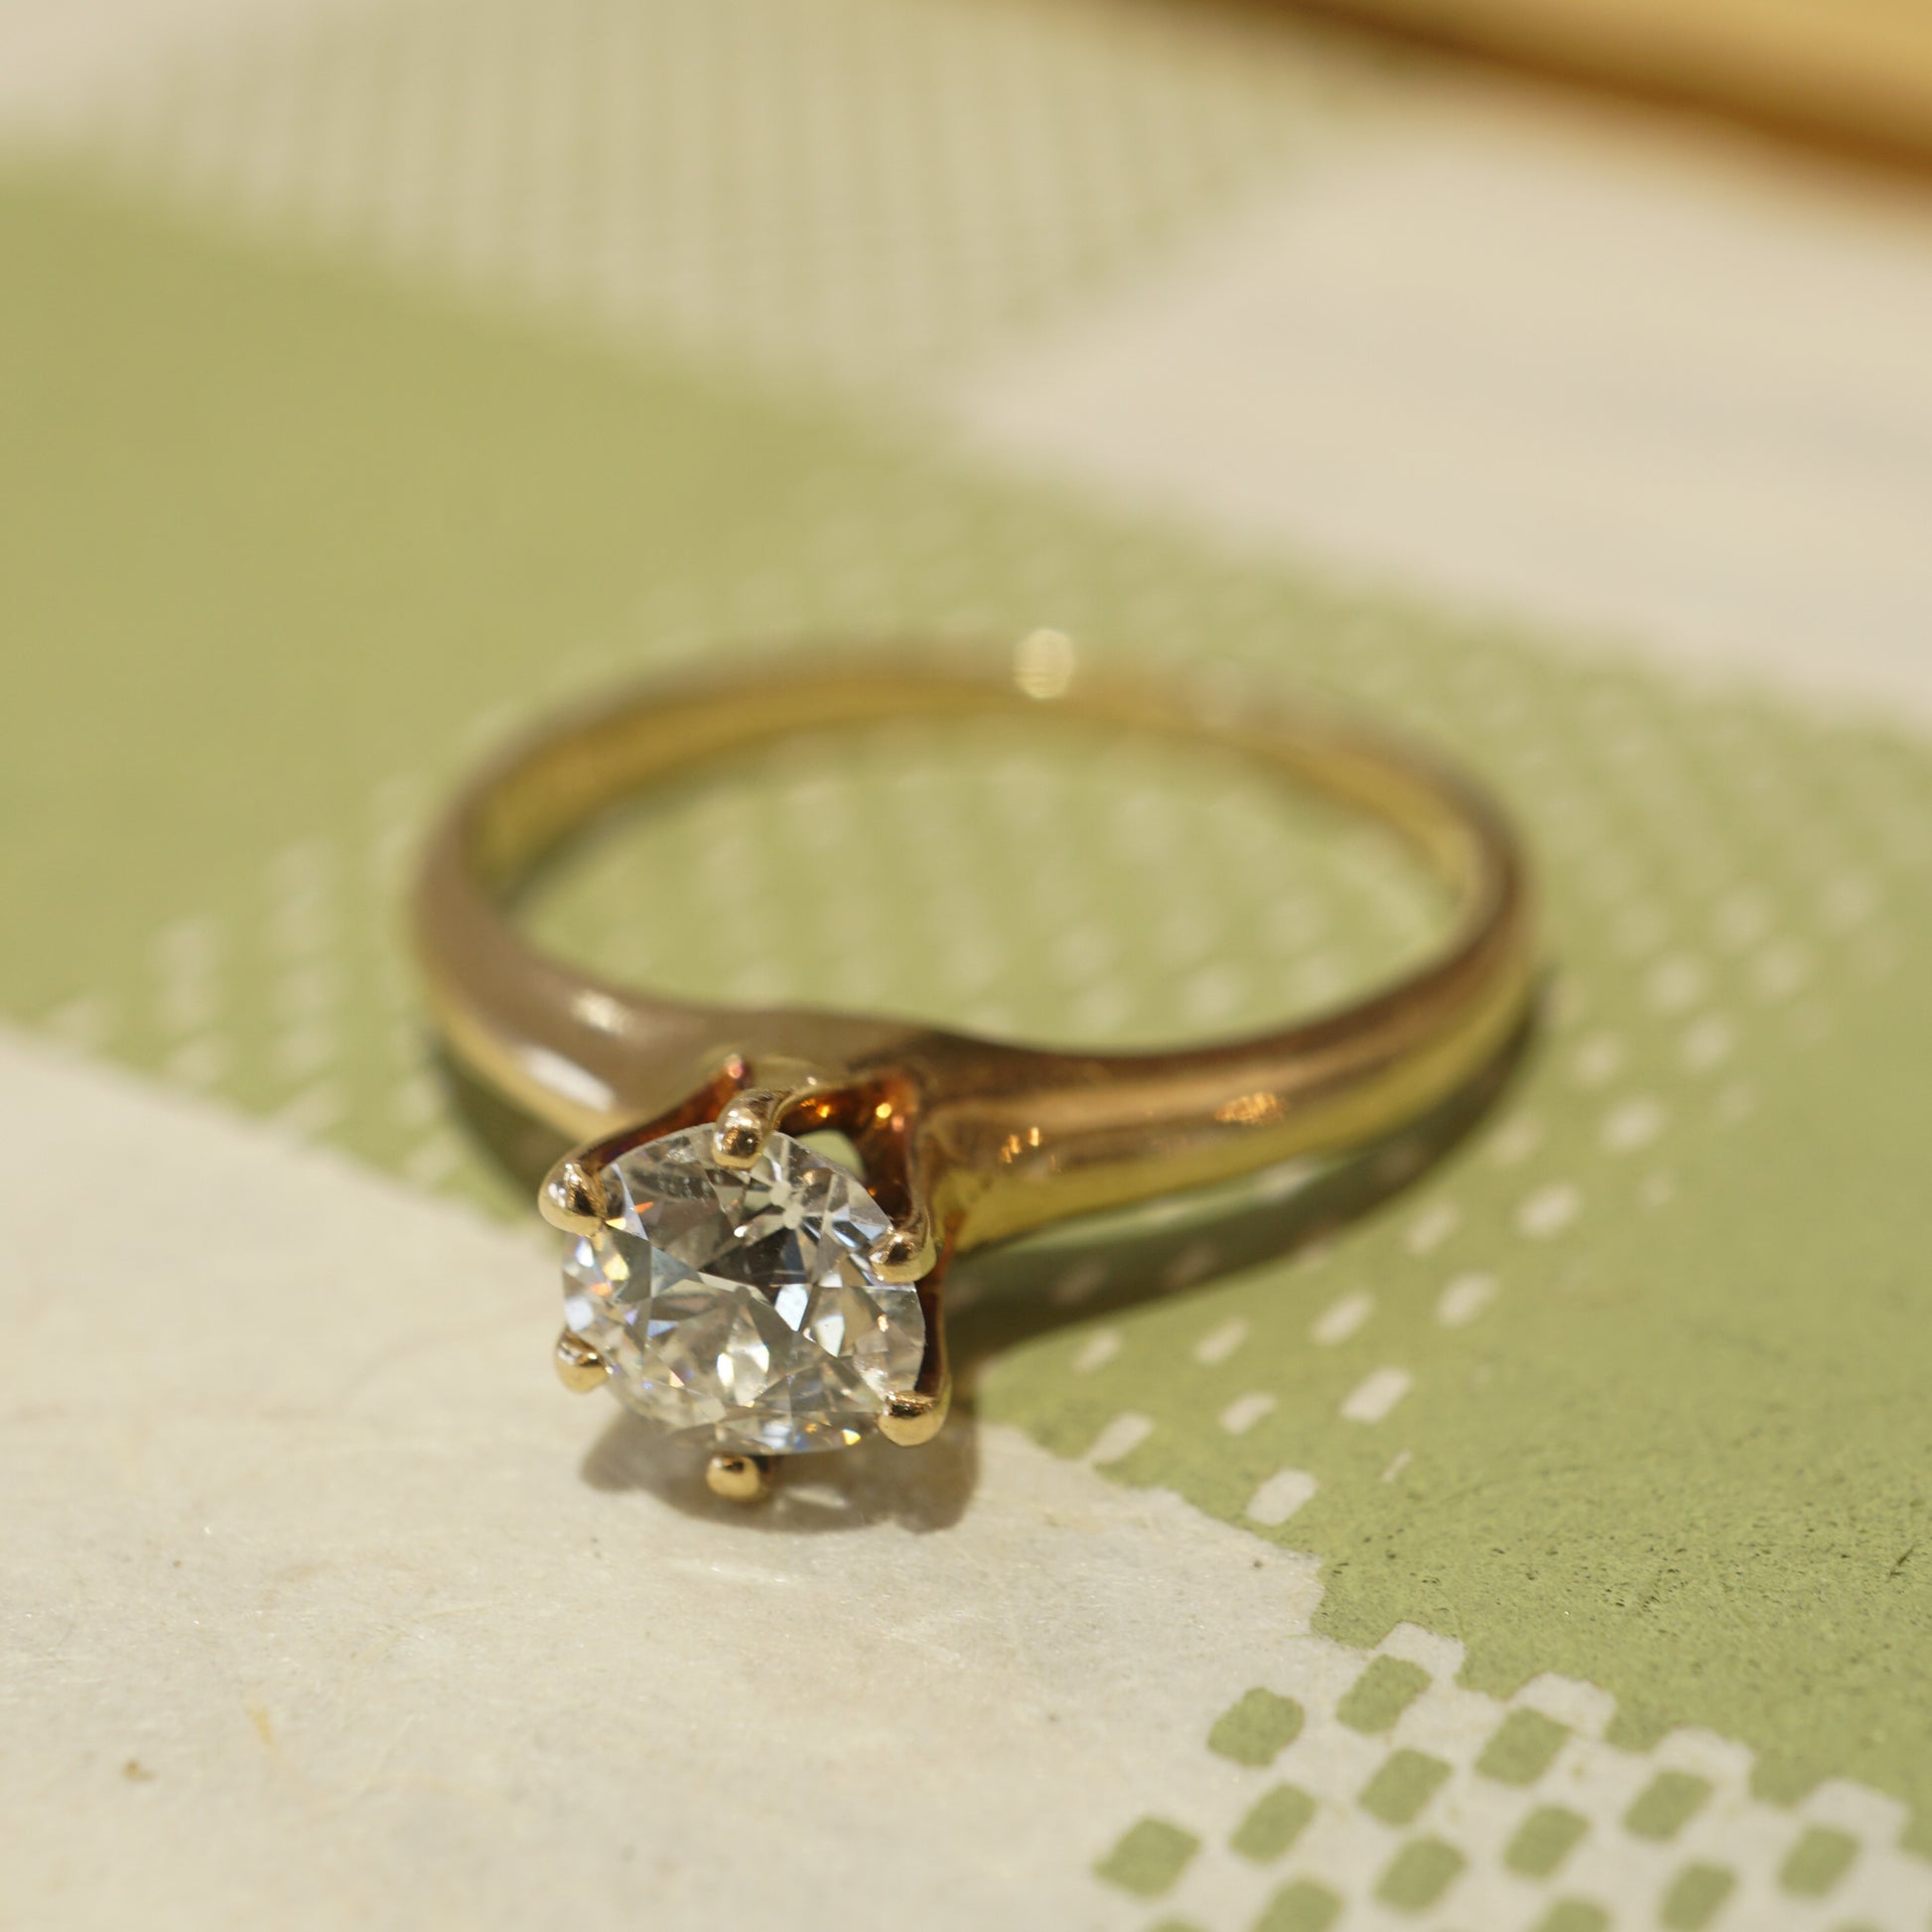 .55 Victorian Solitaire Diamond Engagement Ring in 14k Yellow GoldComposition: 14 Karat Yellow GoldRing Size: 6.5Total Diamond Weight: .55 ctTotal Gram Weight: 2.5 gInscription: 14K